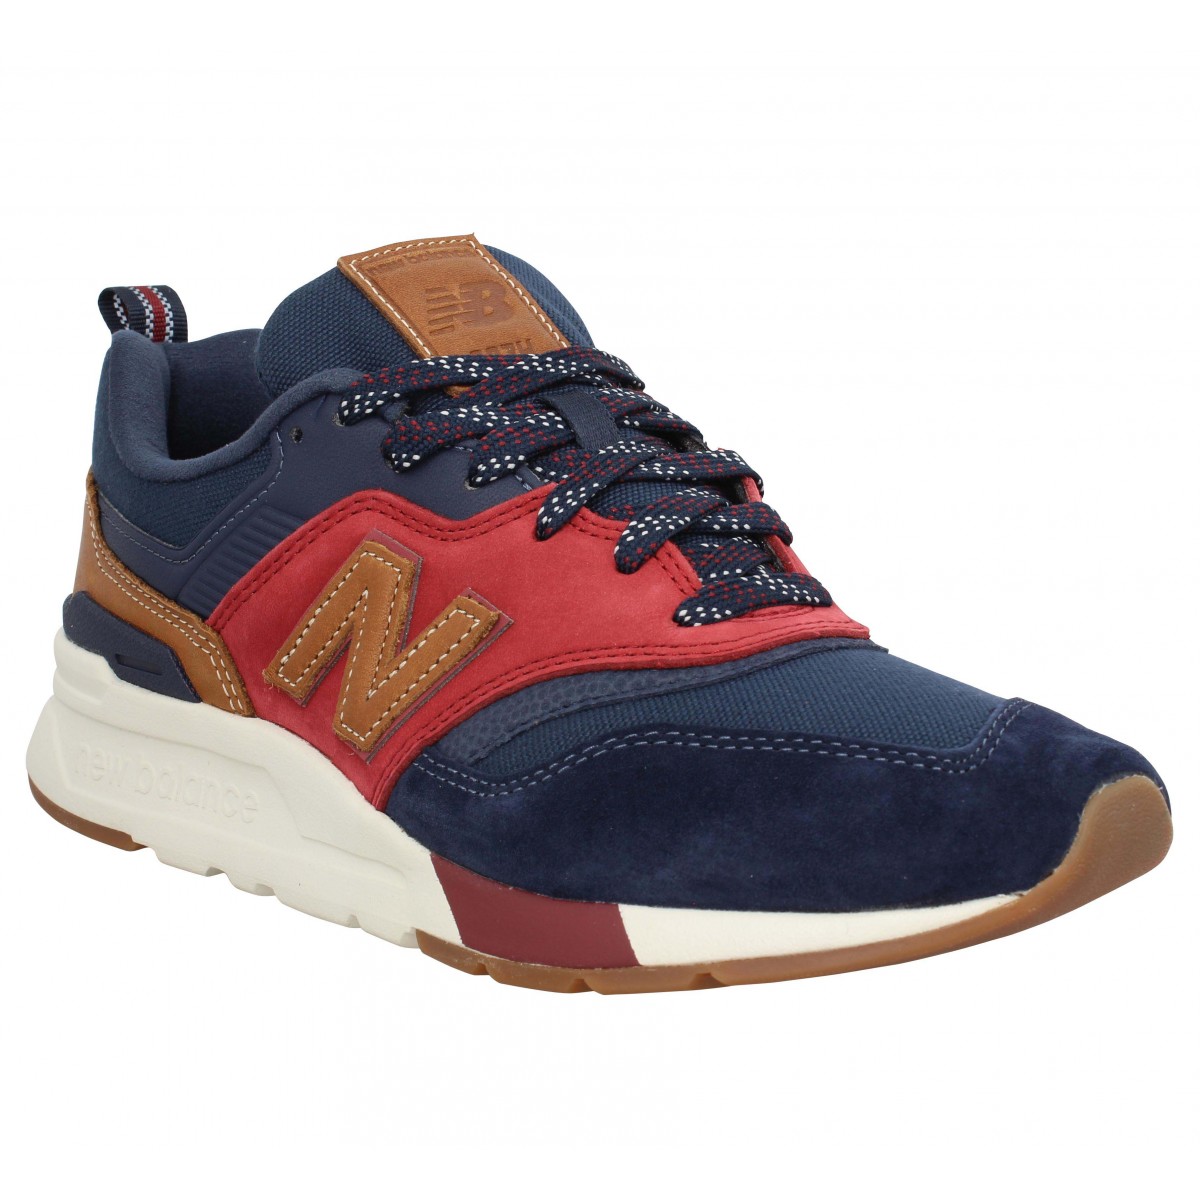 new balance homme rouge